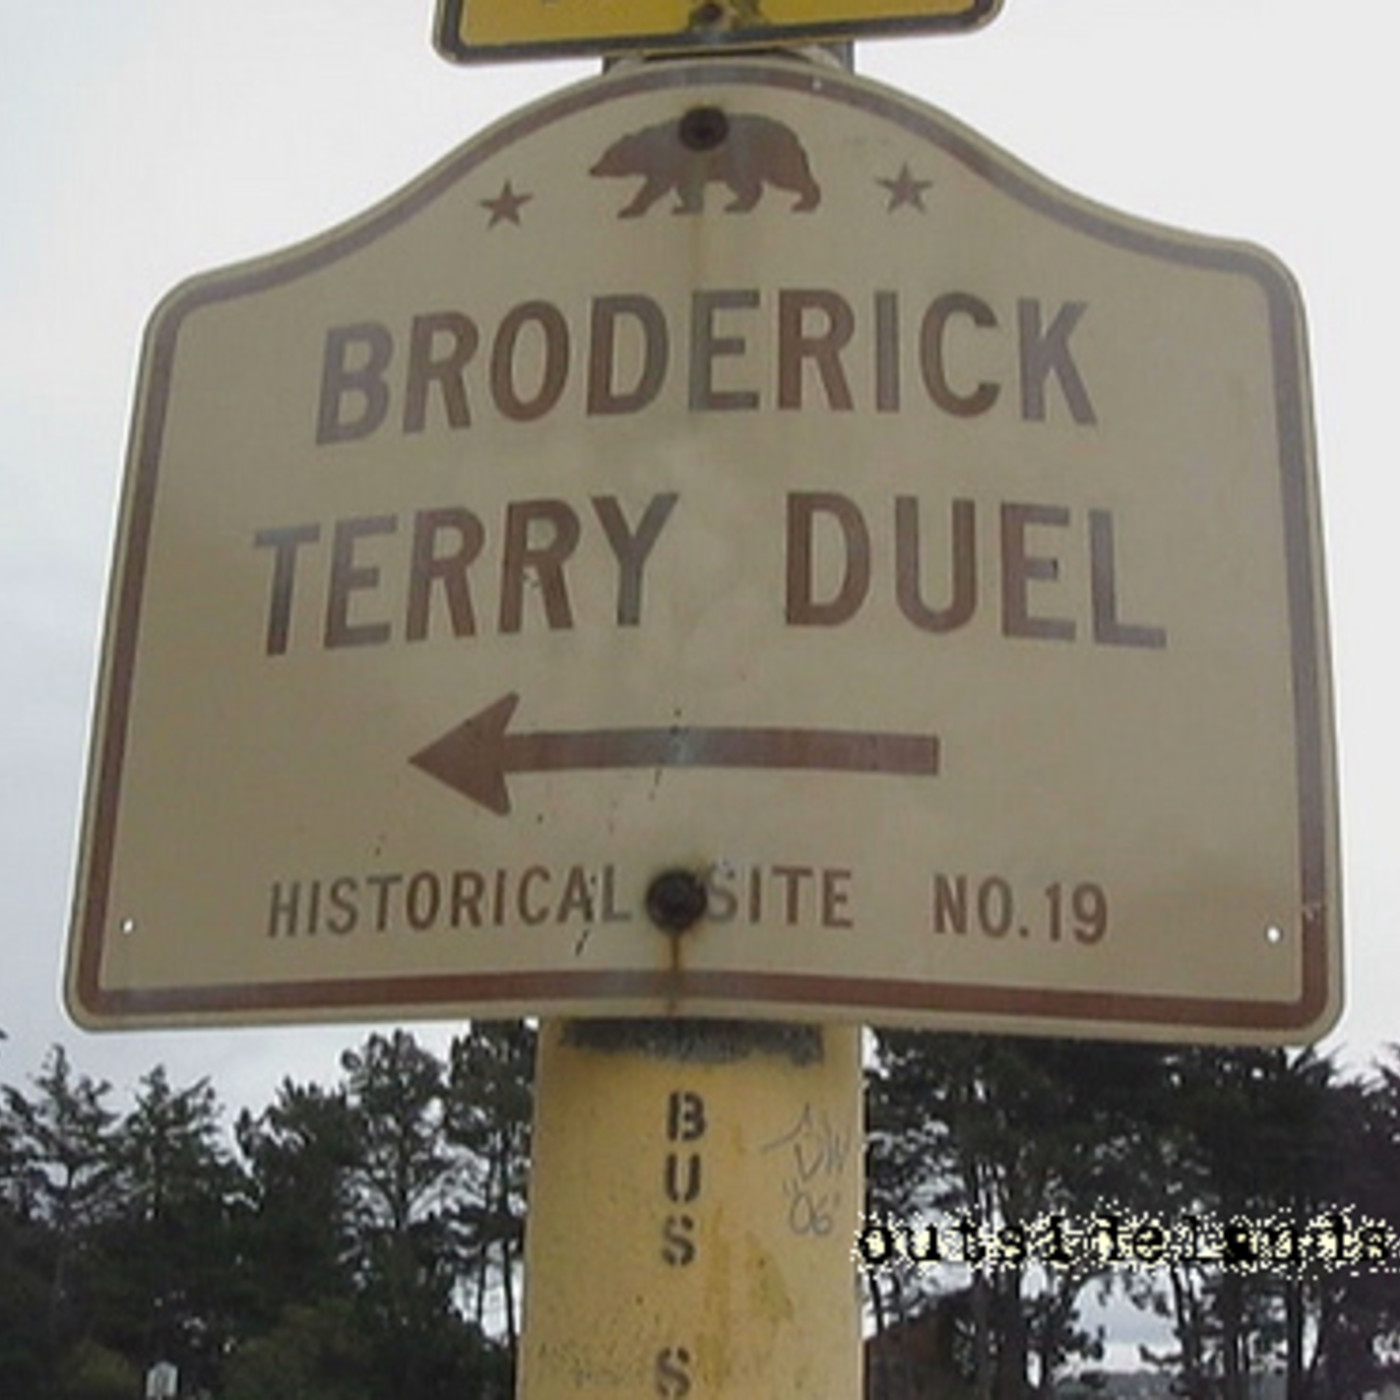 143 - The Broderick Terry Duel